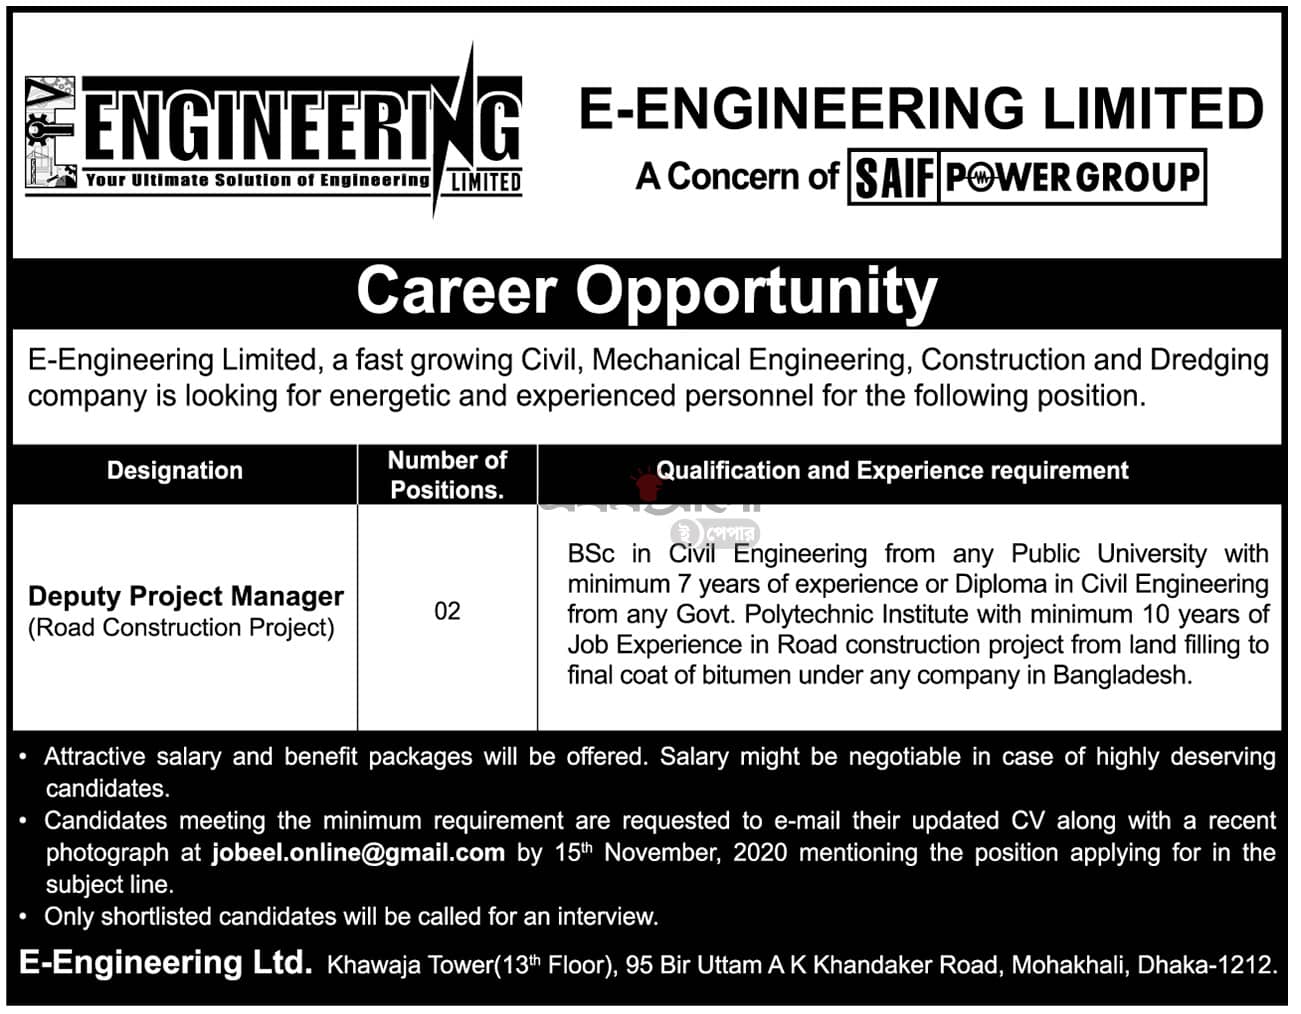 Civil Engineering jobs in Bangladesh for Deputy Project Manager